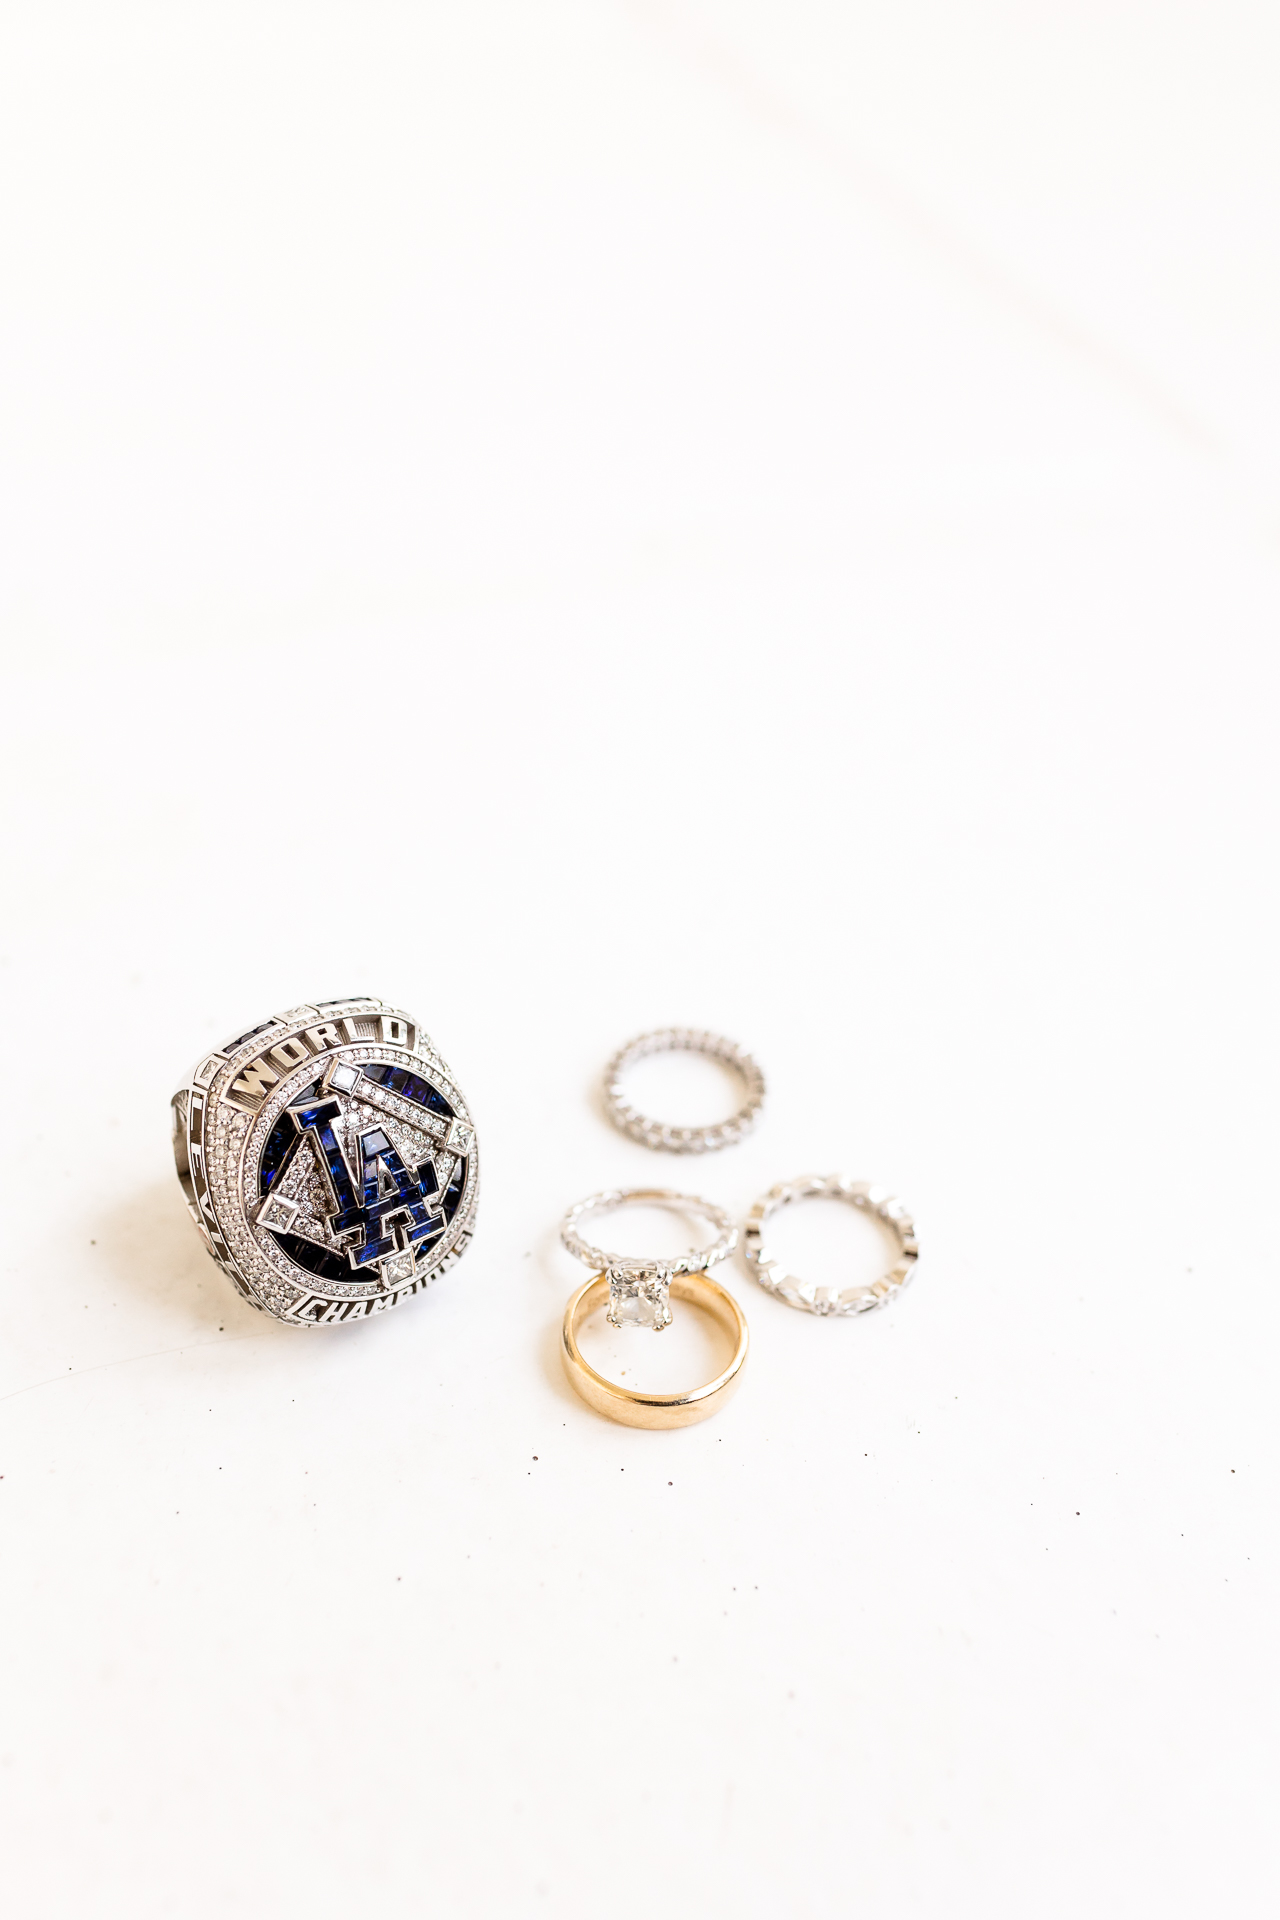 bride and groom wedding rings with LA Dodgers world series ring